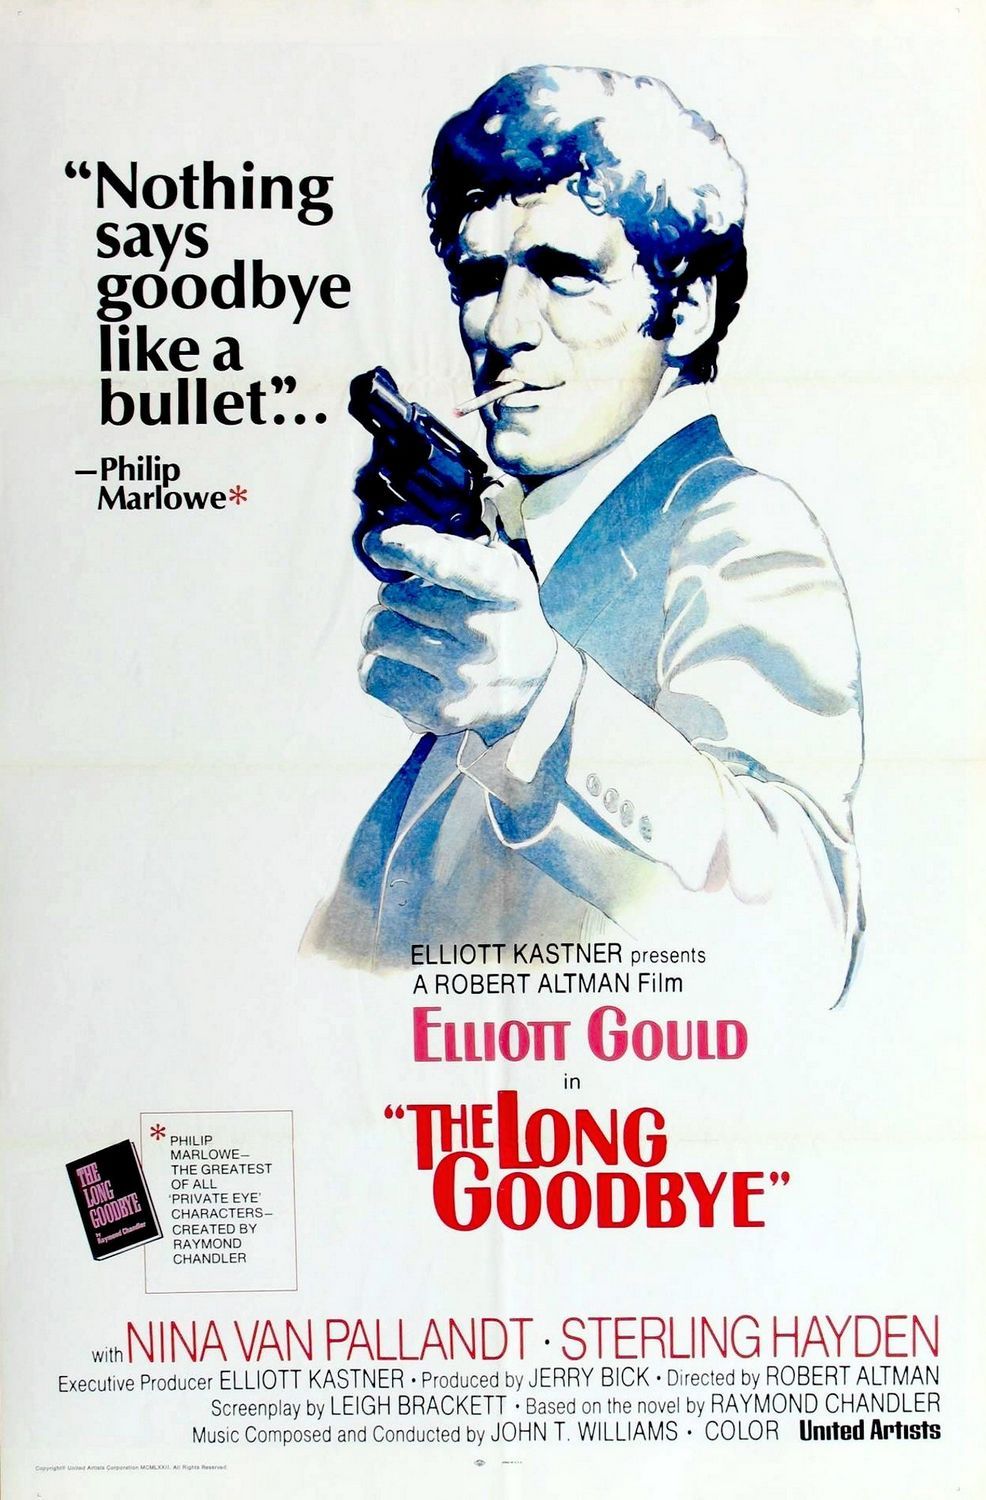 The Jackass Critics Podcast presents The Long Goodbye.